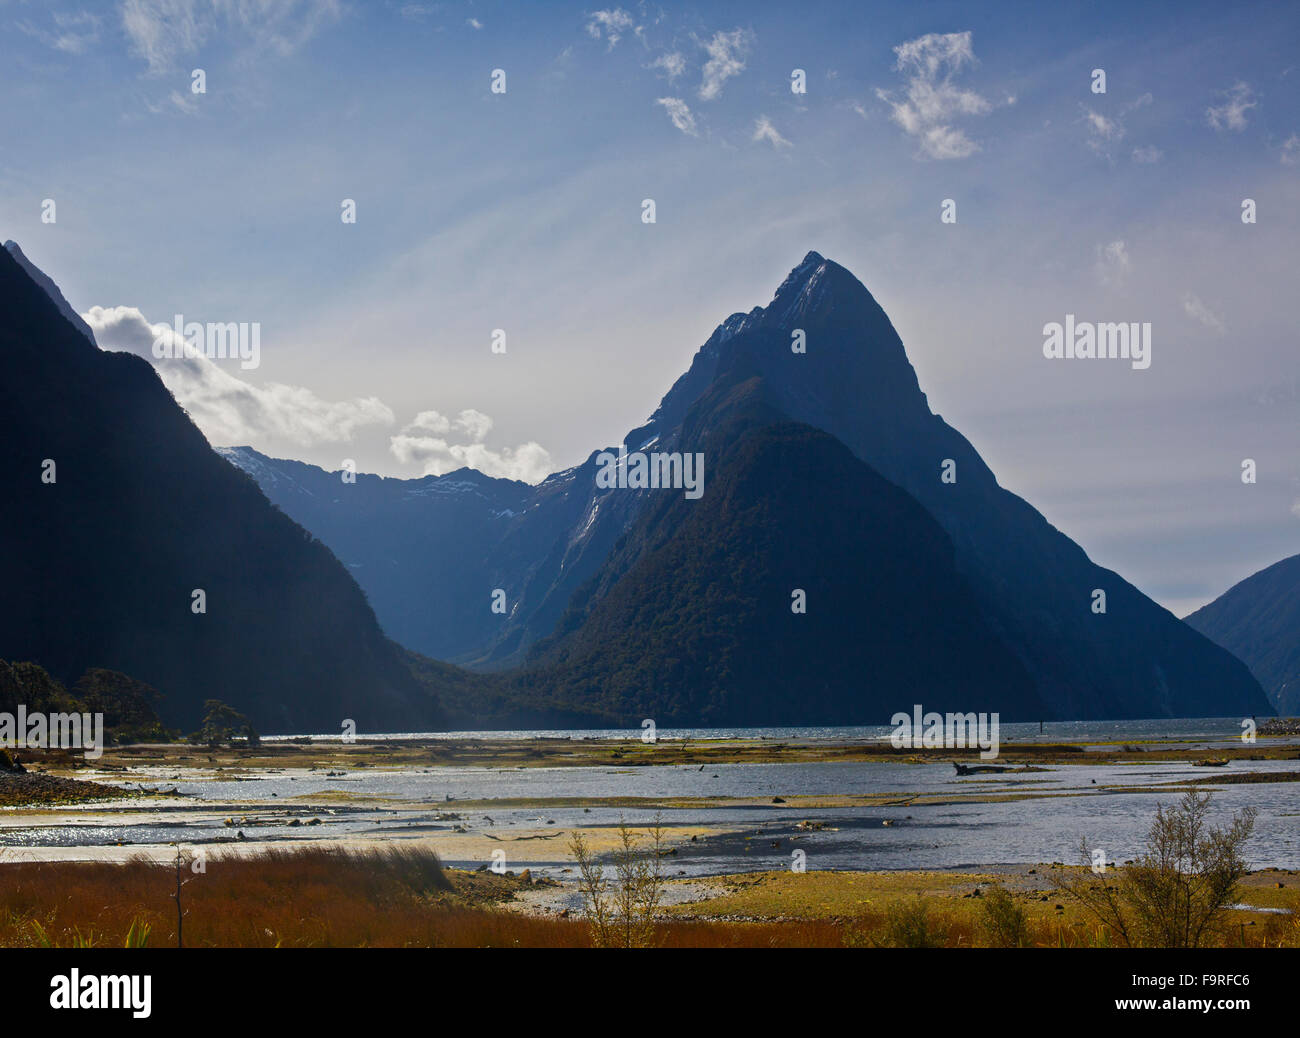 Milford Sound looking northwest from the township. The triangle shape of Mitre Peak is 1,692 m (5,551 ft) above the sea level. Stock Photo